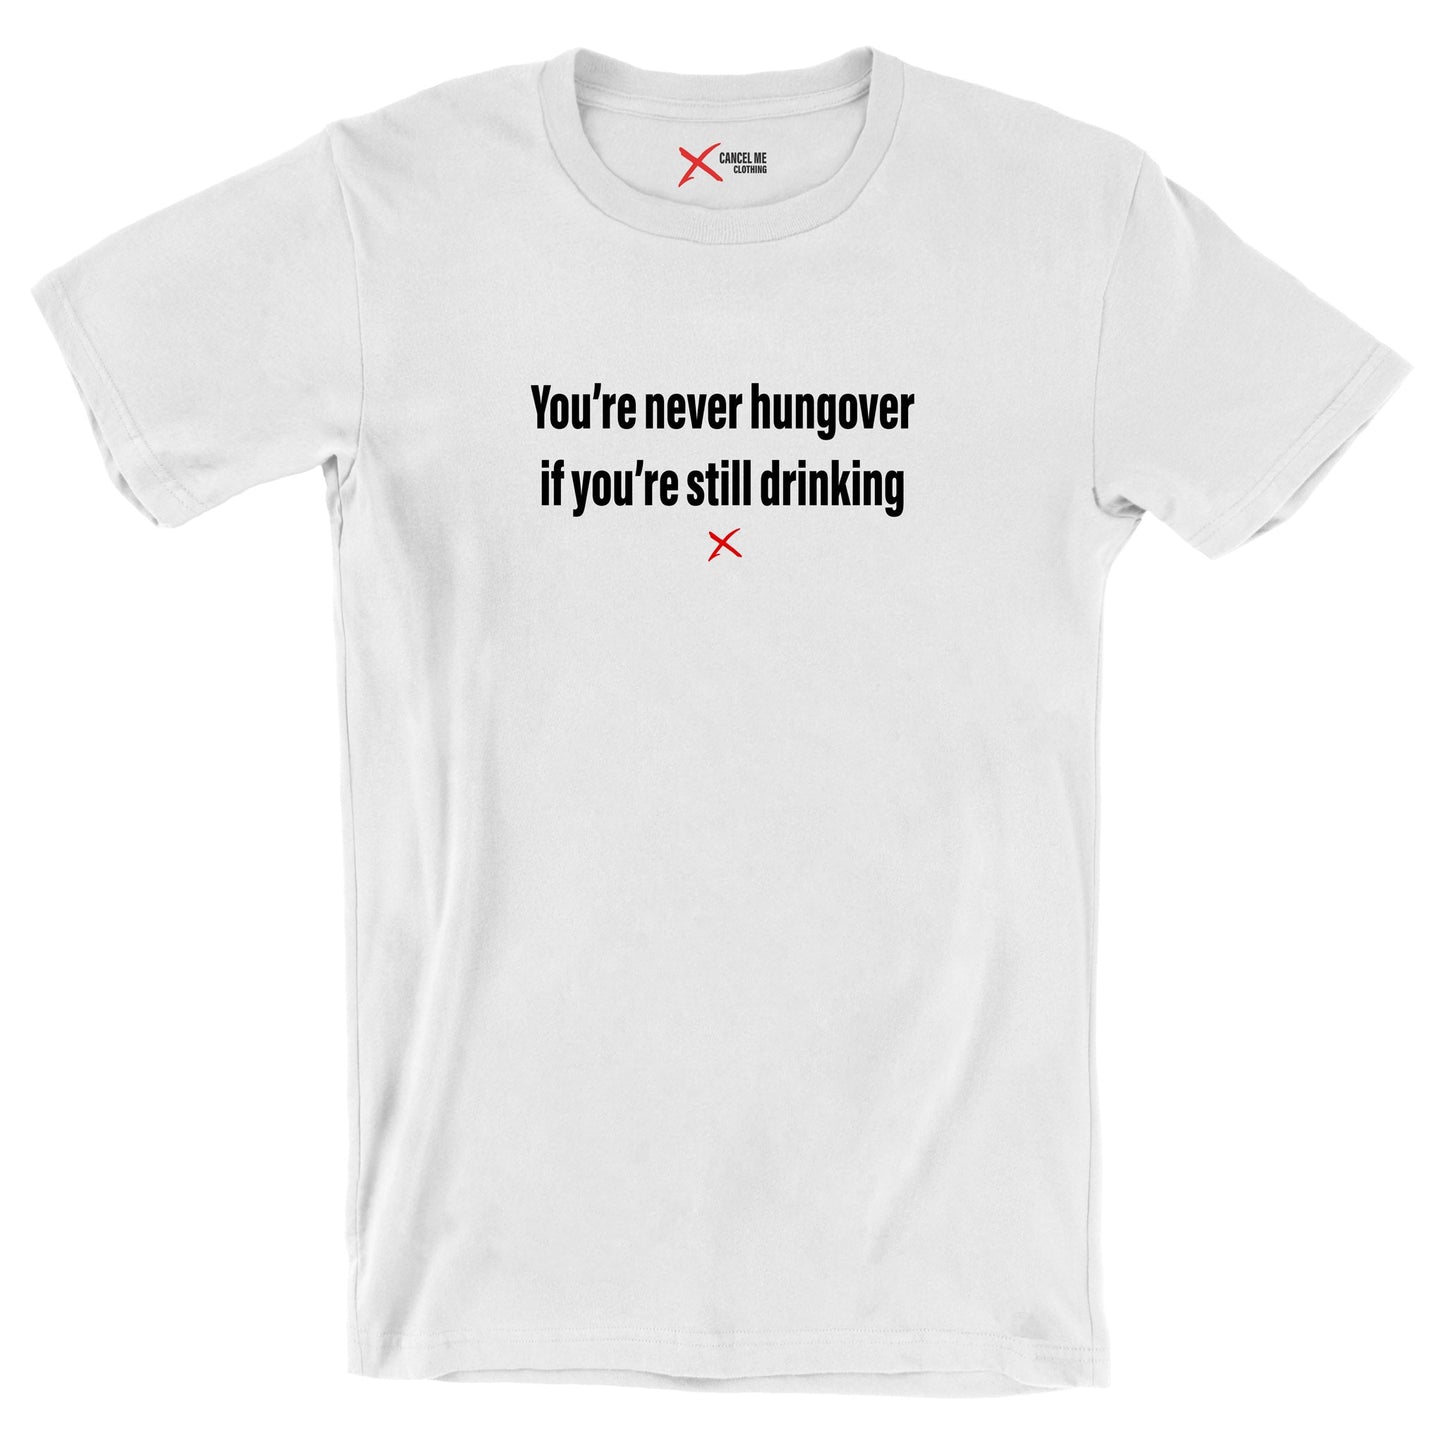 You're never hungover if you're still drinking - Shirt